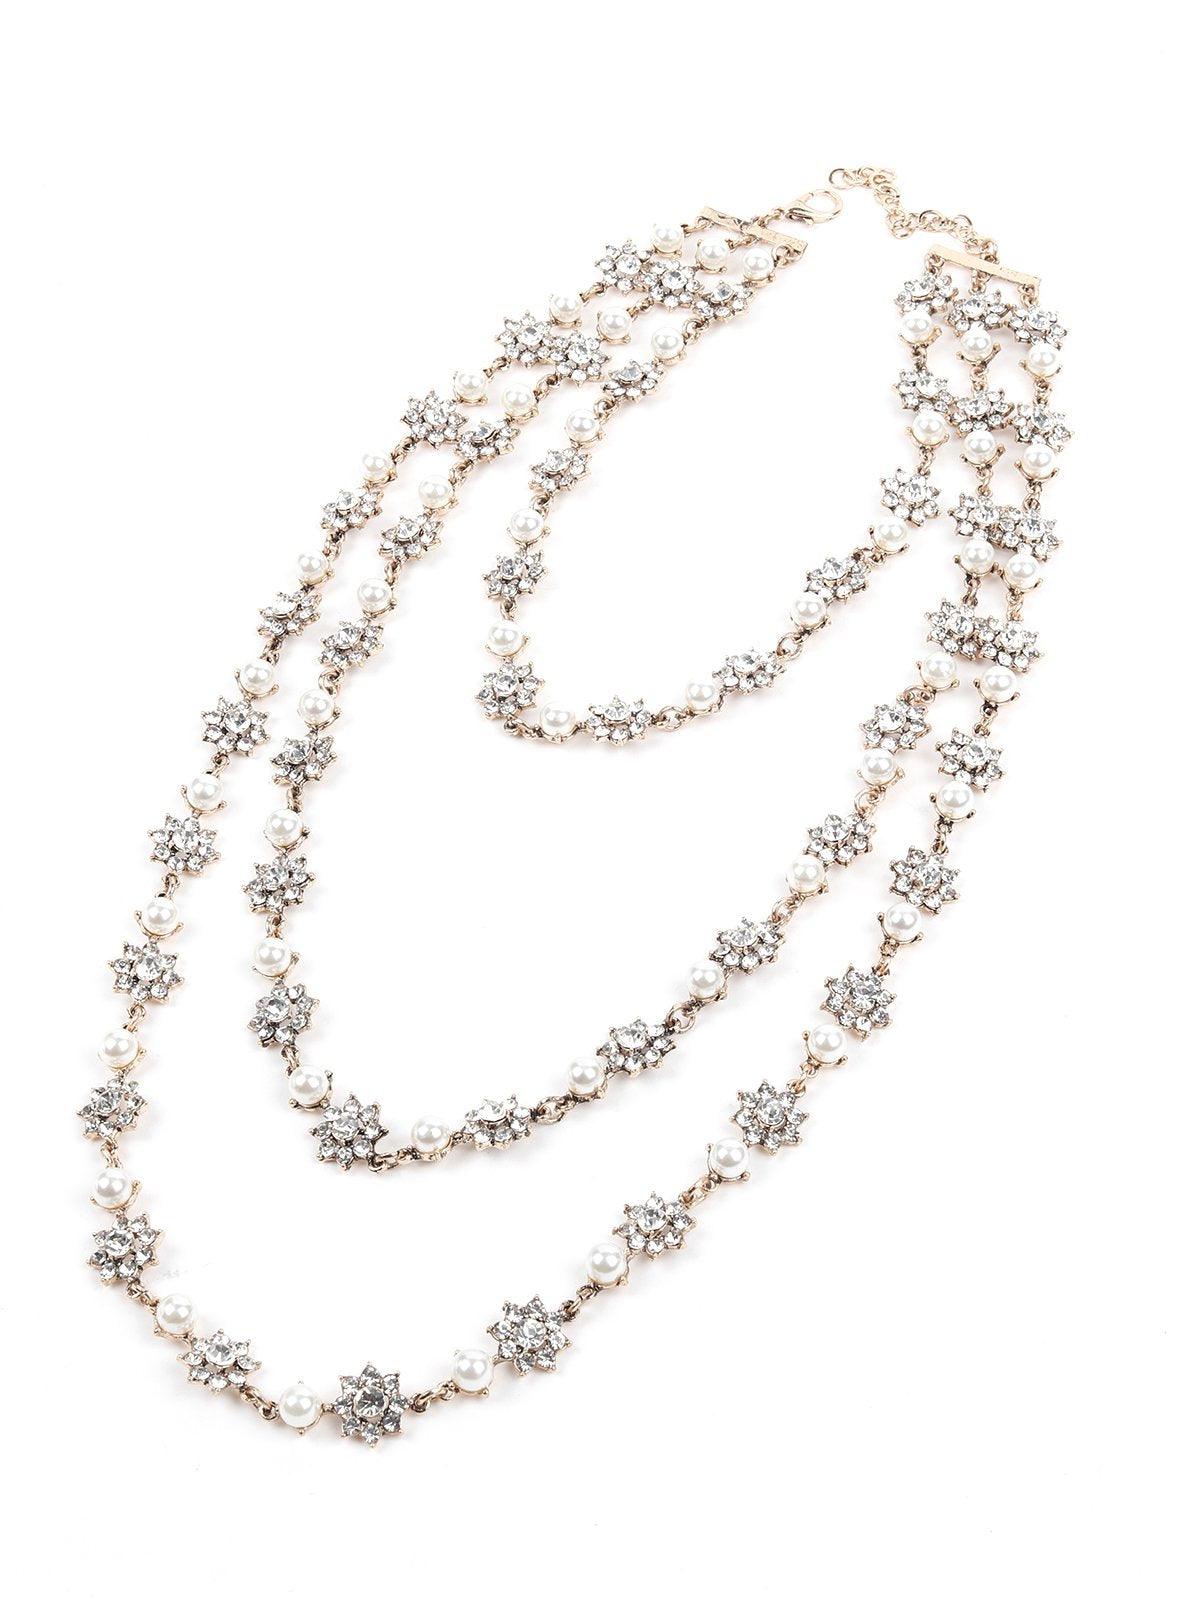 Women's Exquisite Designer 3 Layered Necklace With Pearls. - White - Odette